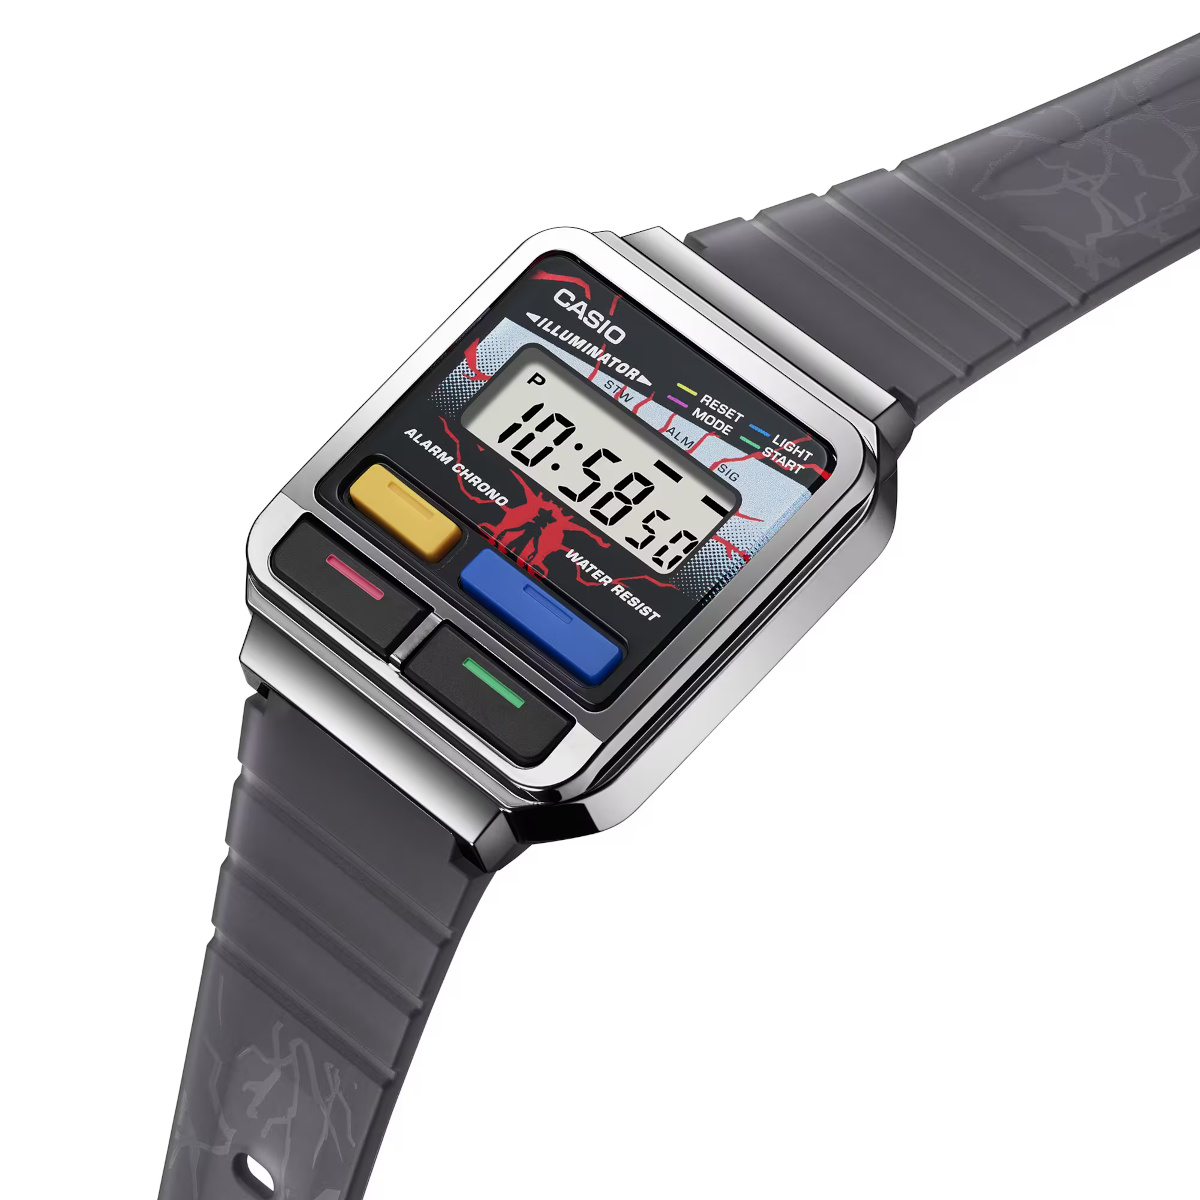 Casio to Things collaboration including digital series release A120 Stranger A120WEST-1A \'80s-style